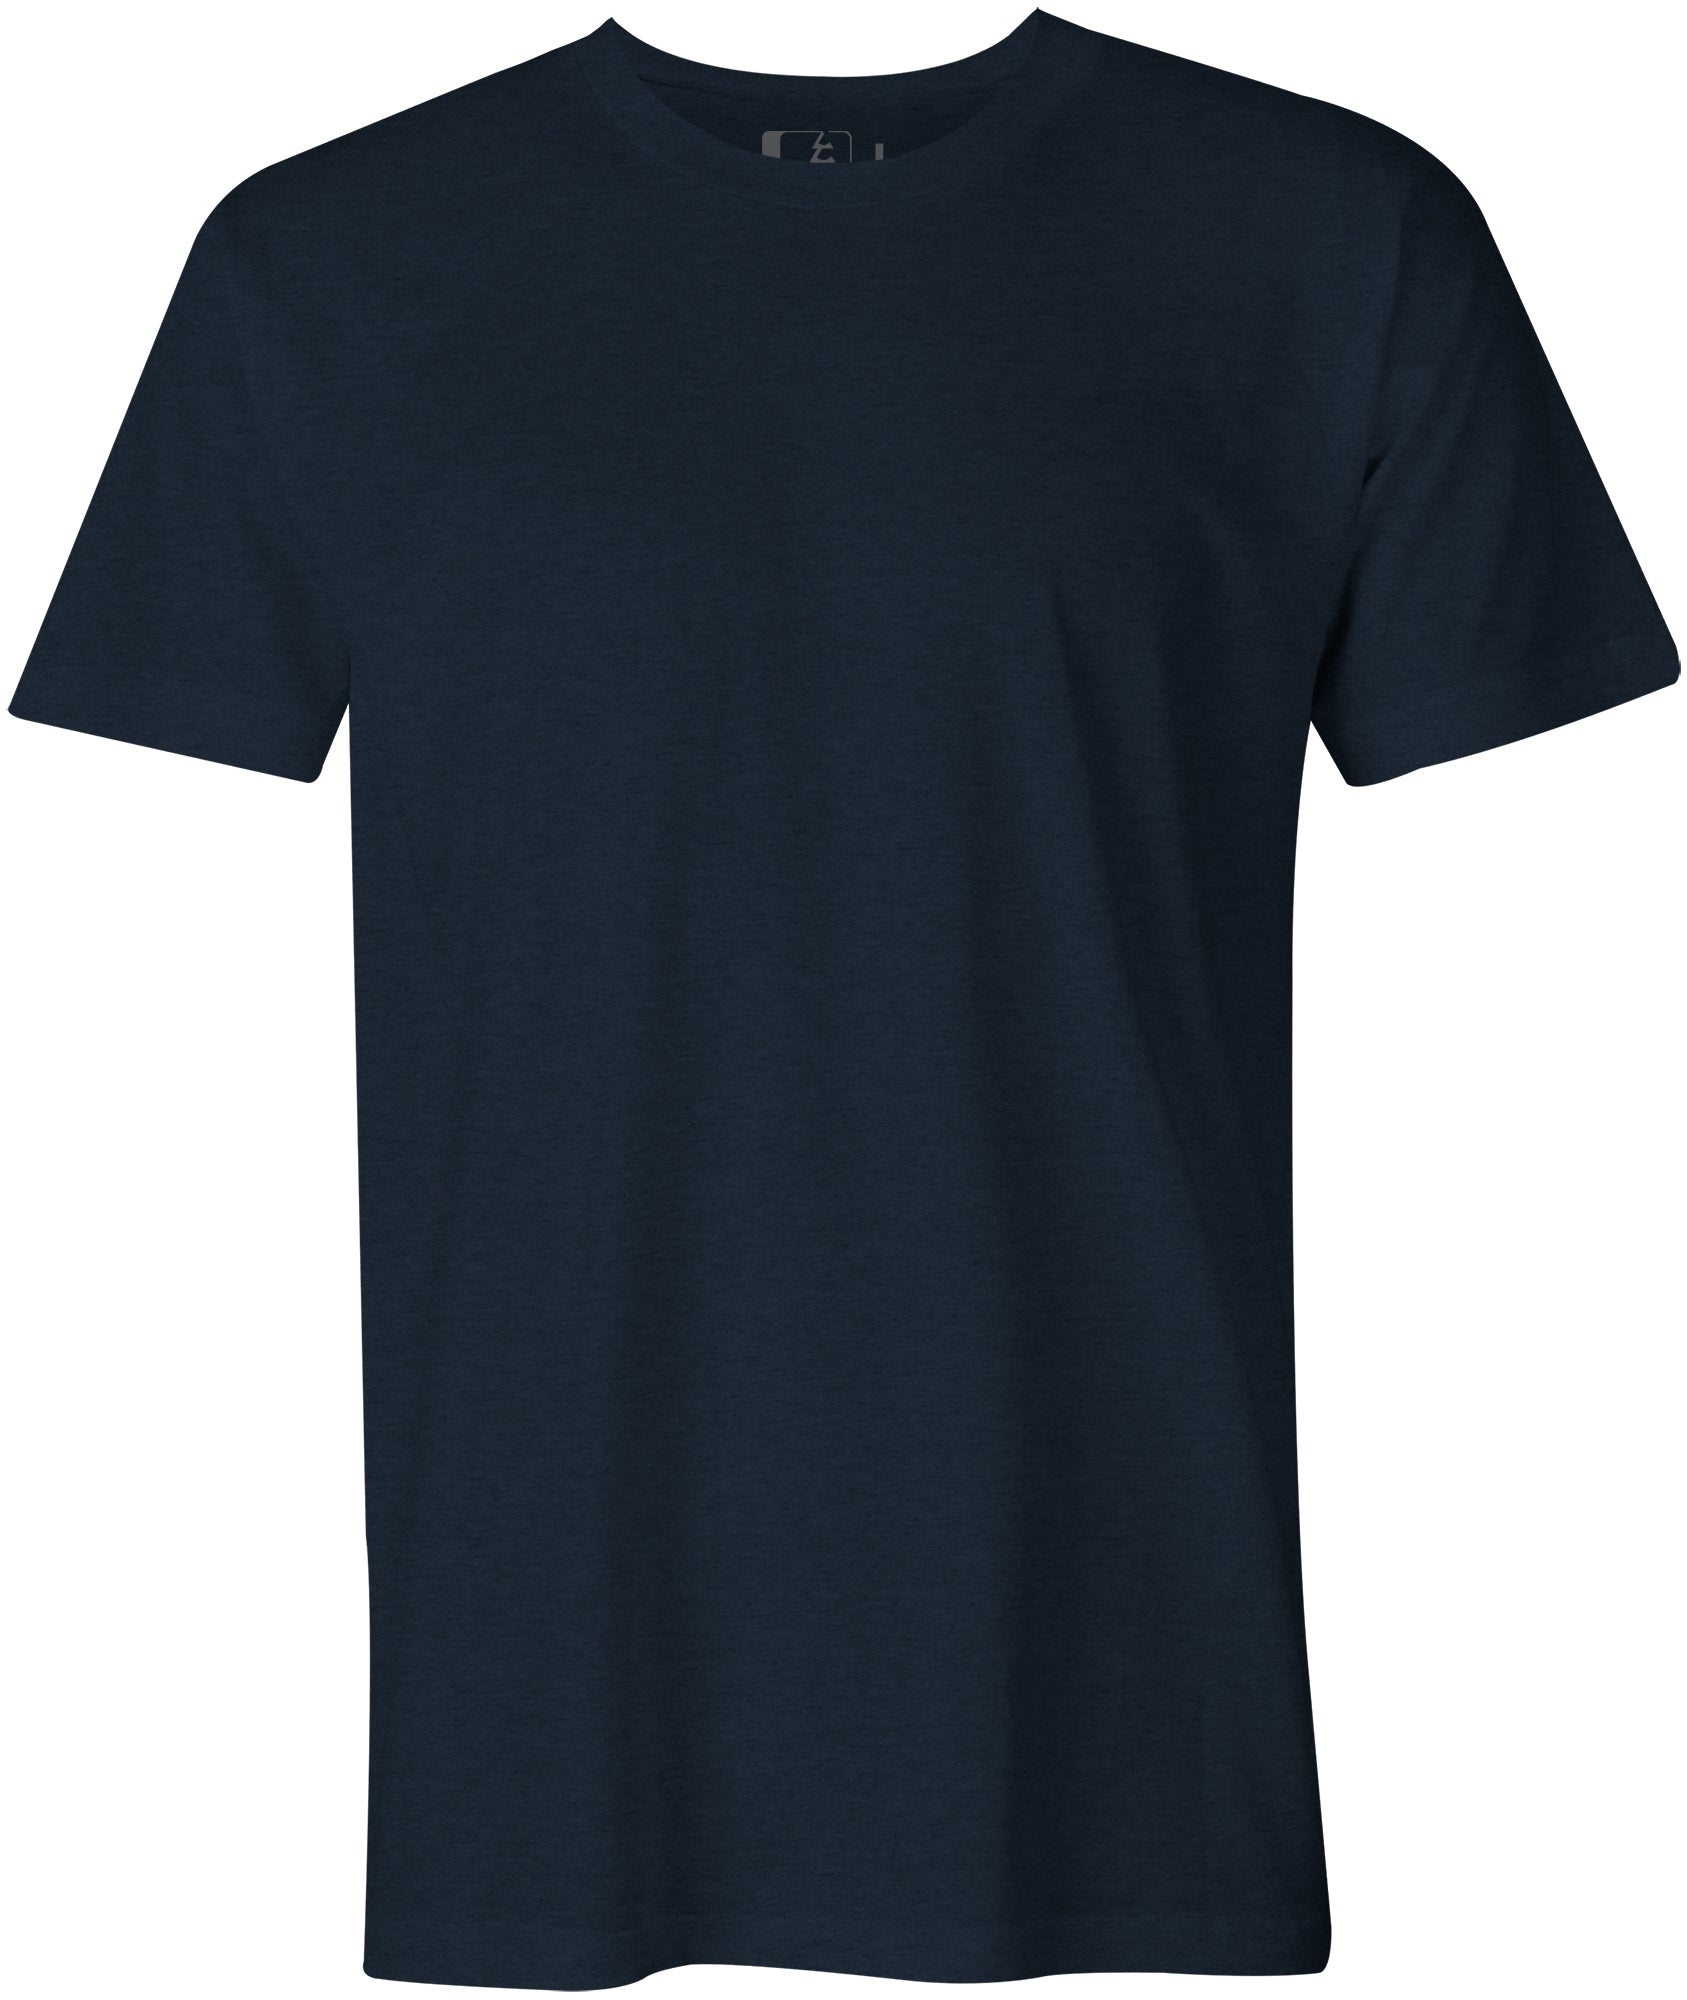 The Classic - Navy